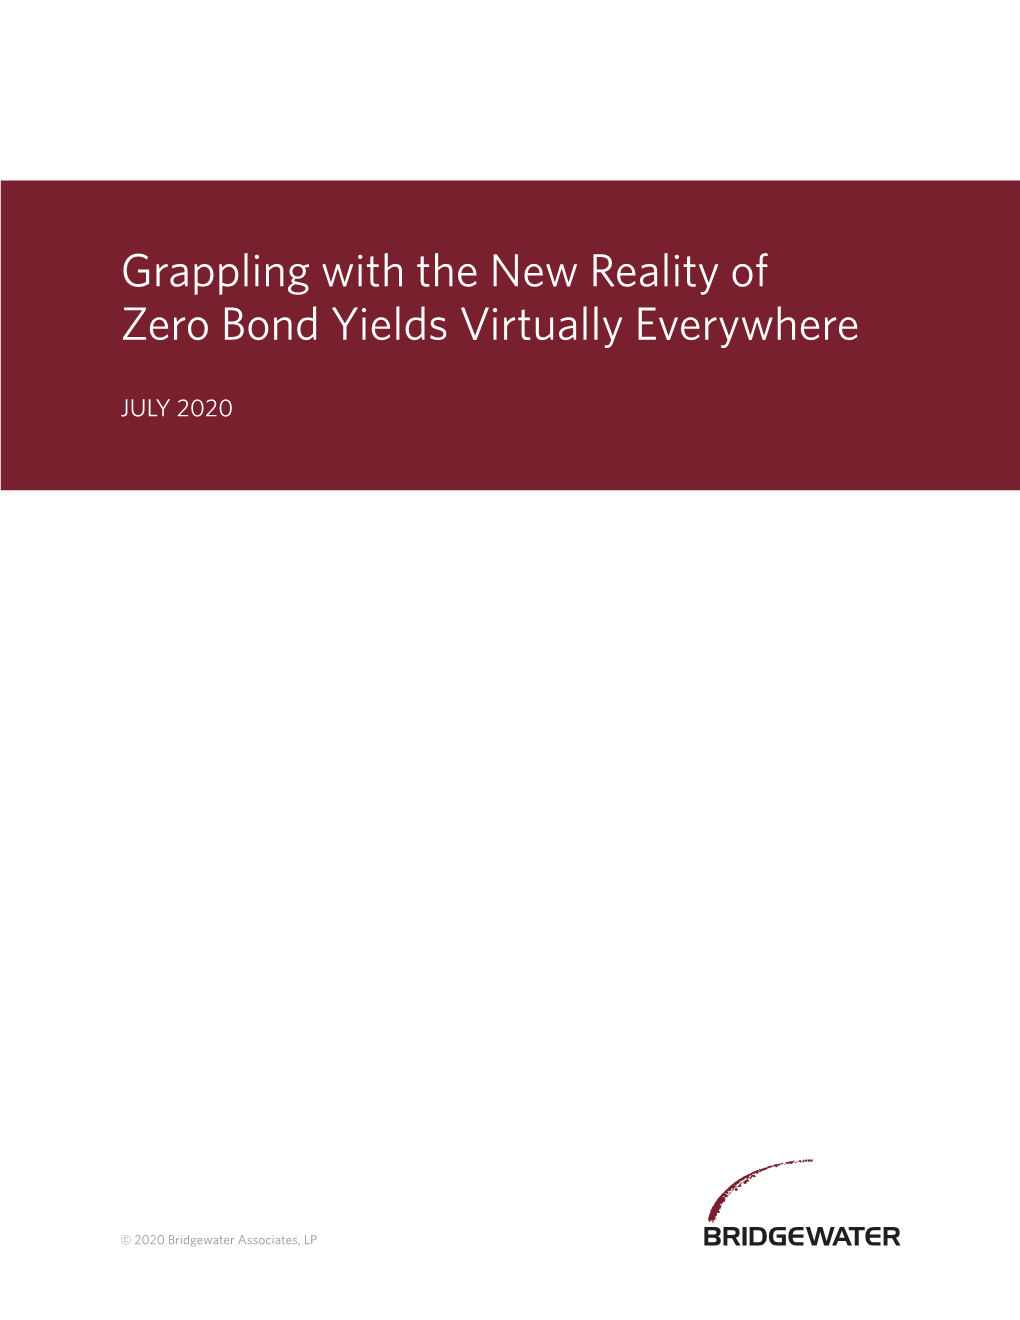 Grappling with the New Reality of Zero Bond Yields Virtually Everywhere